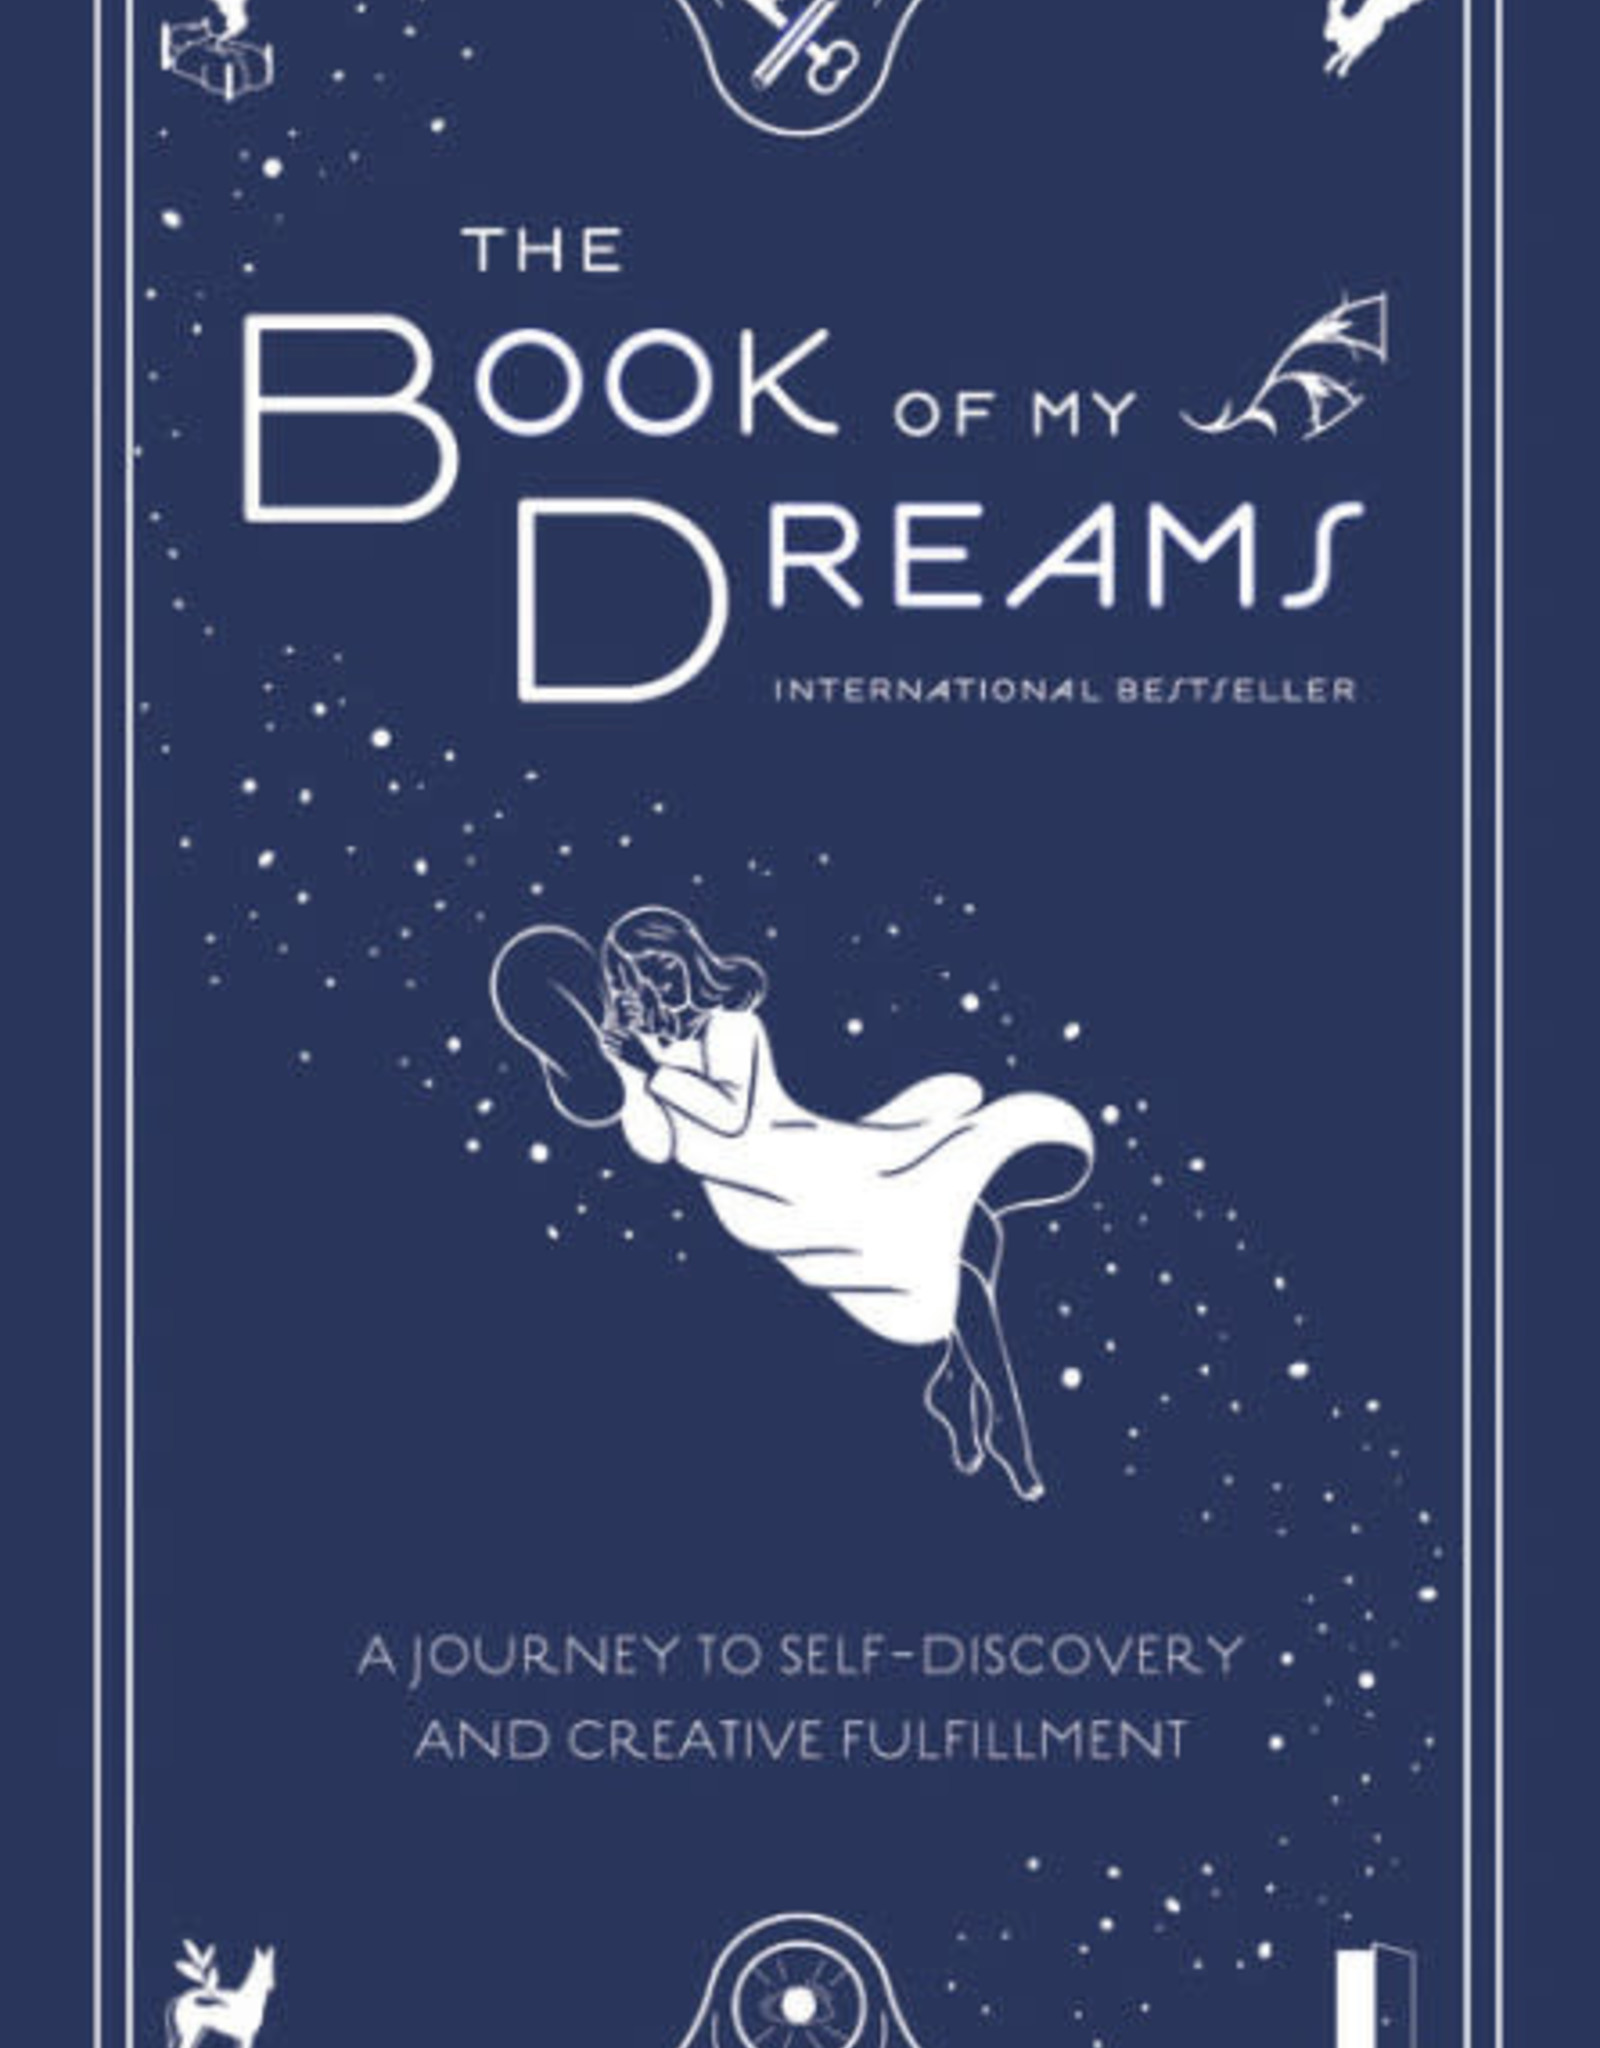 Hachette Book Group * The Book of My Dreams